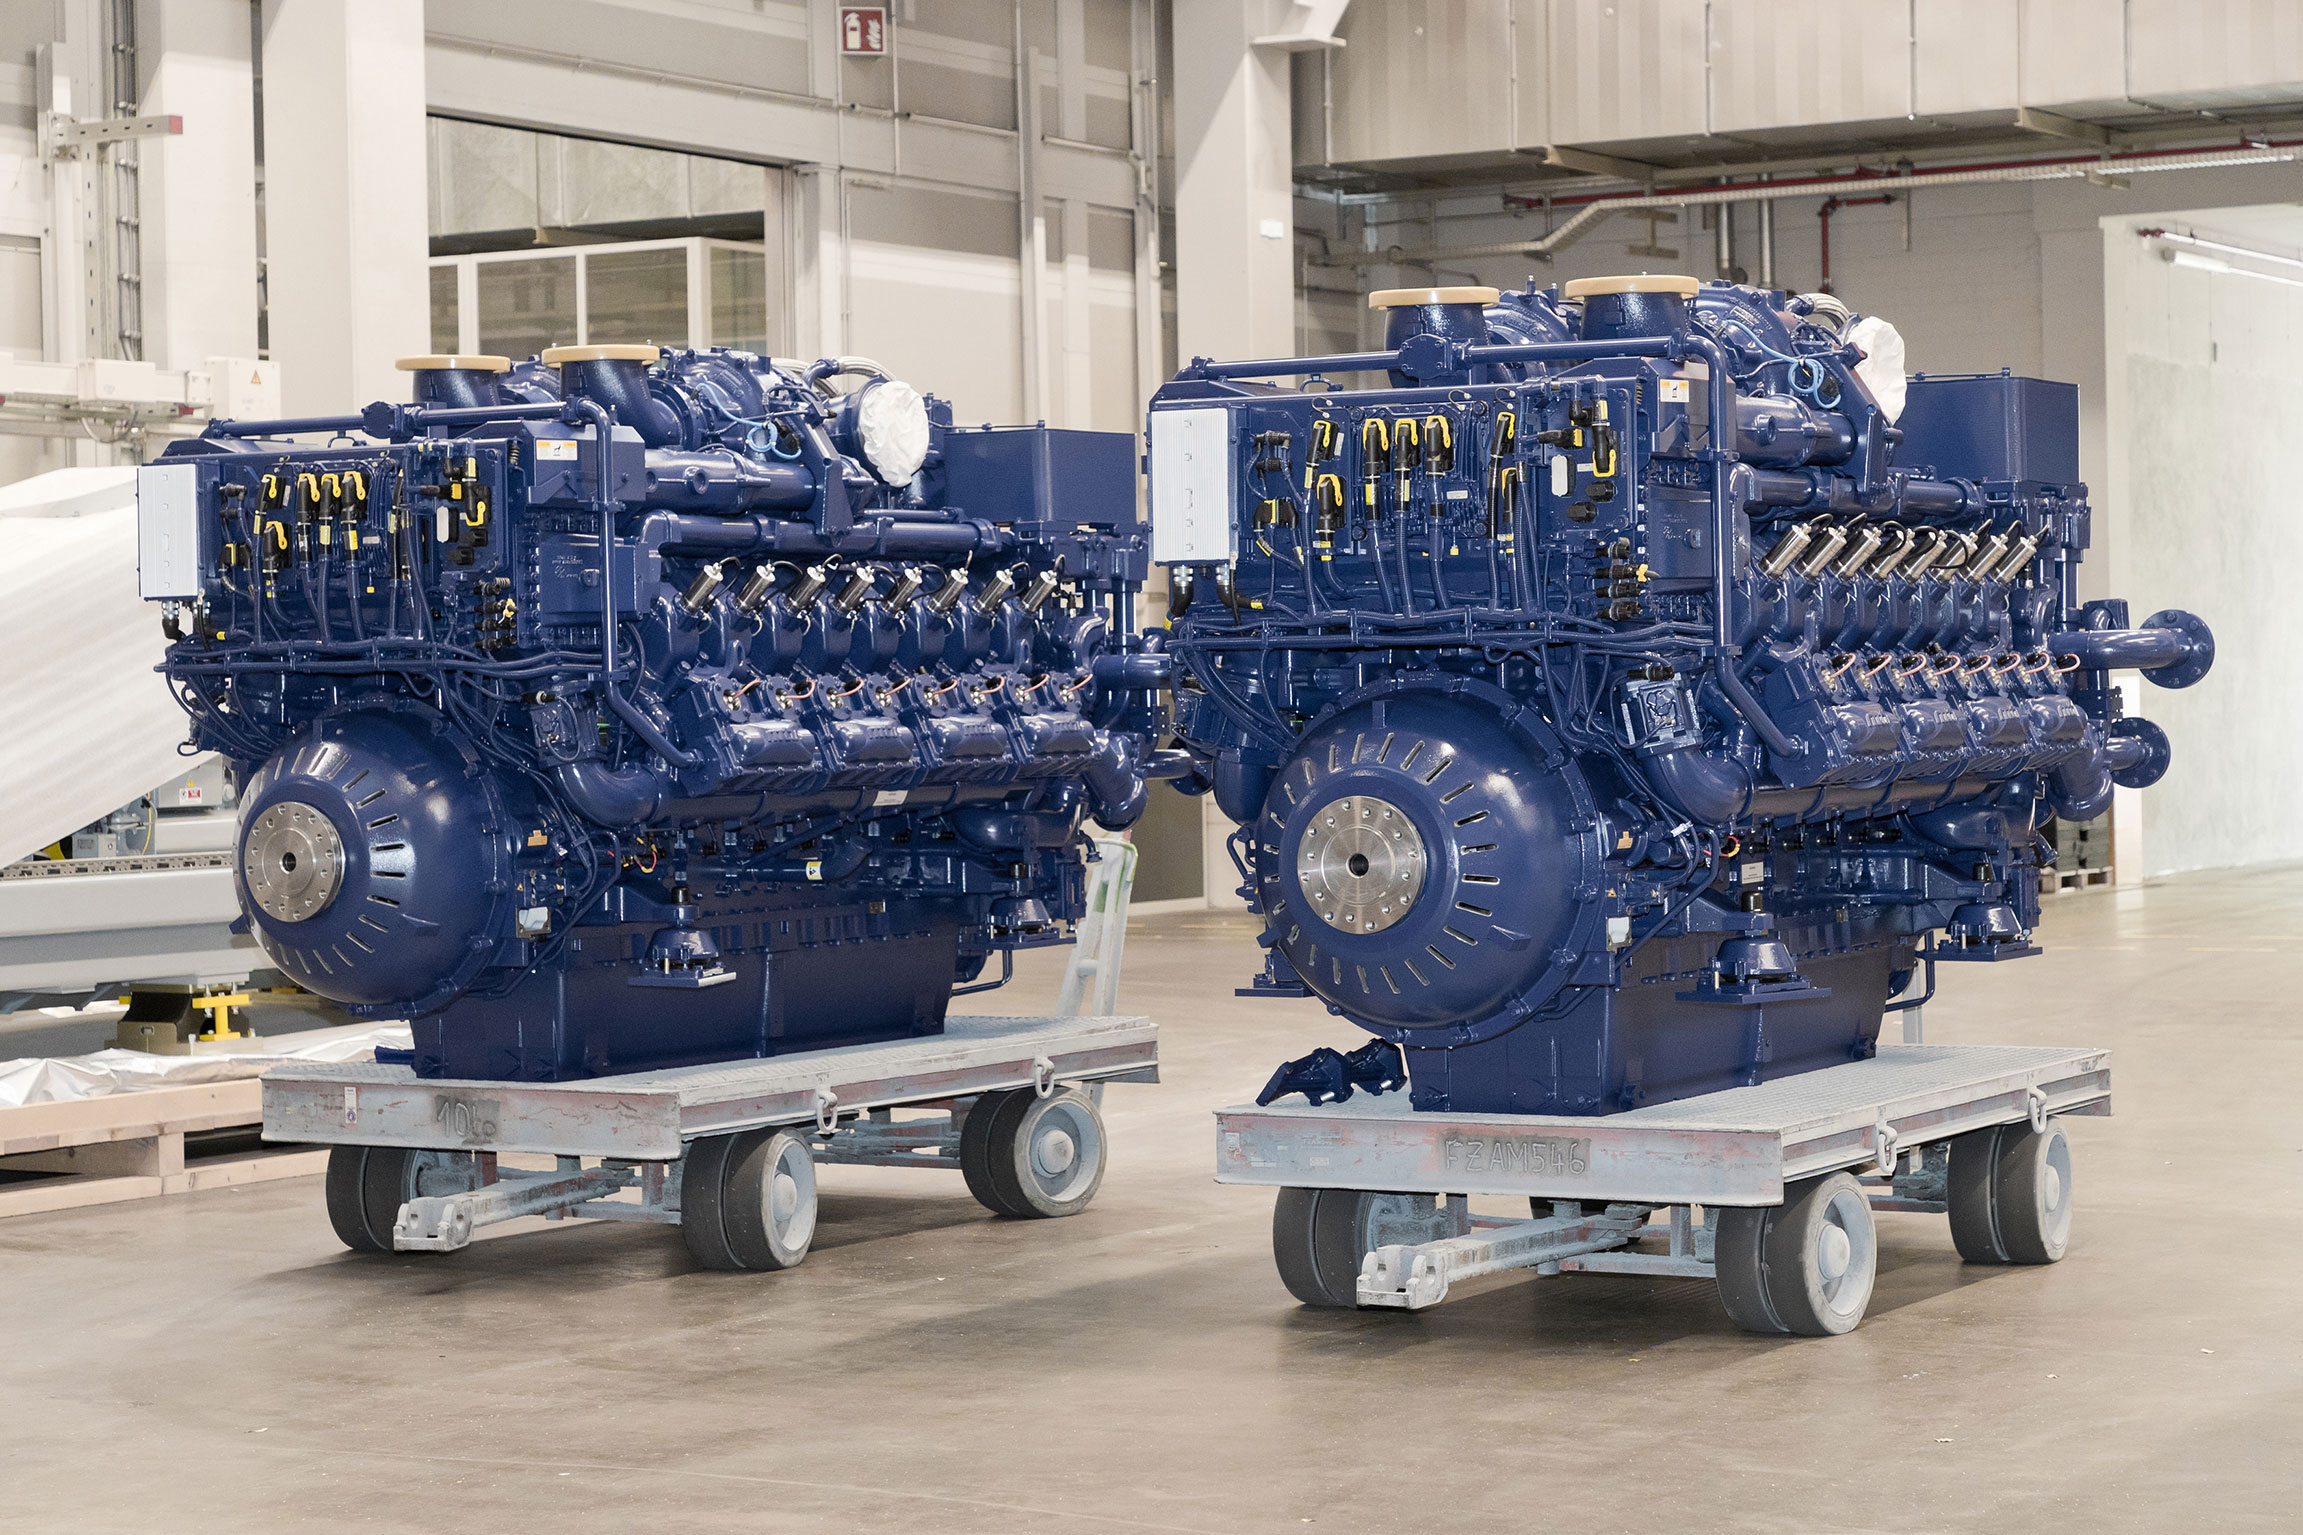 Rolls-Royce supplies gas engines for Singapore’s hybrid LNG tug